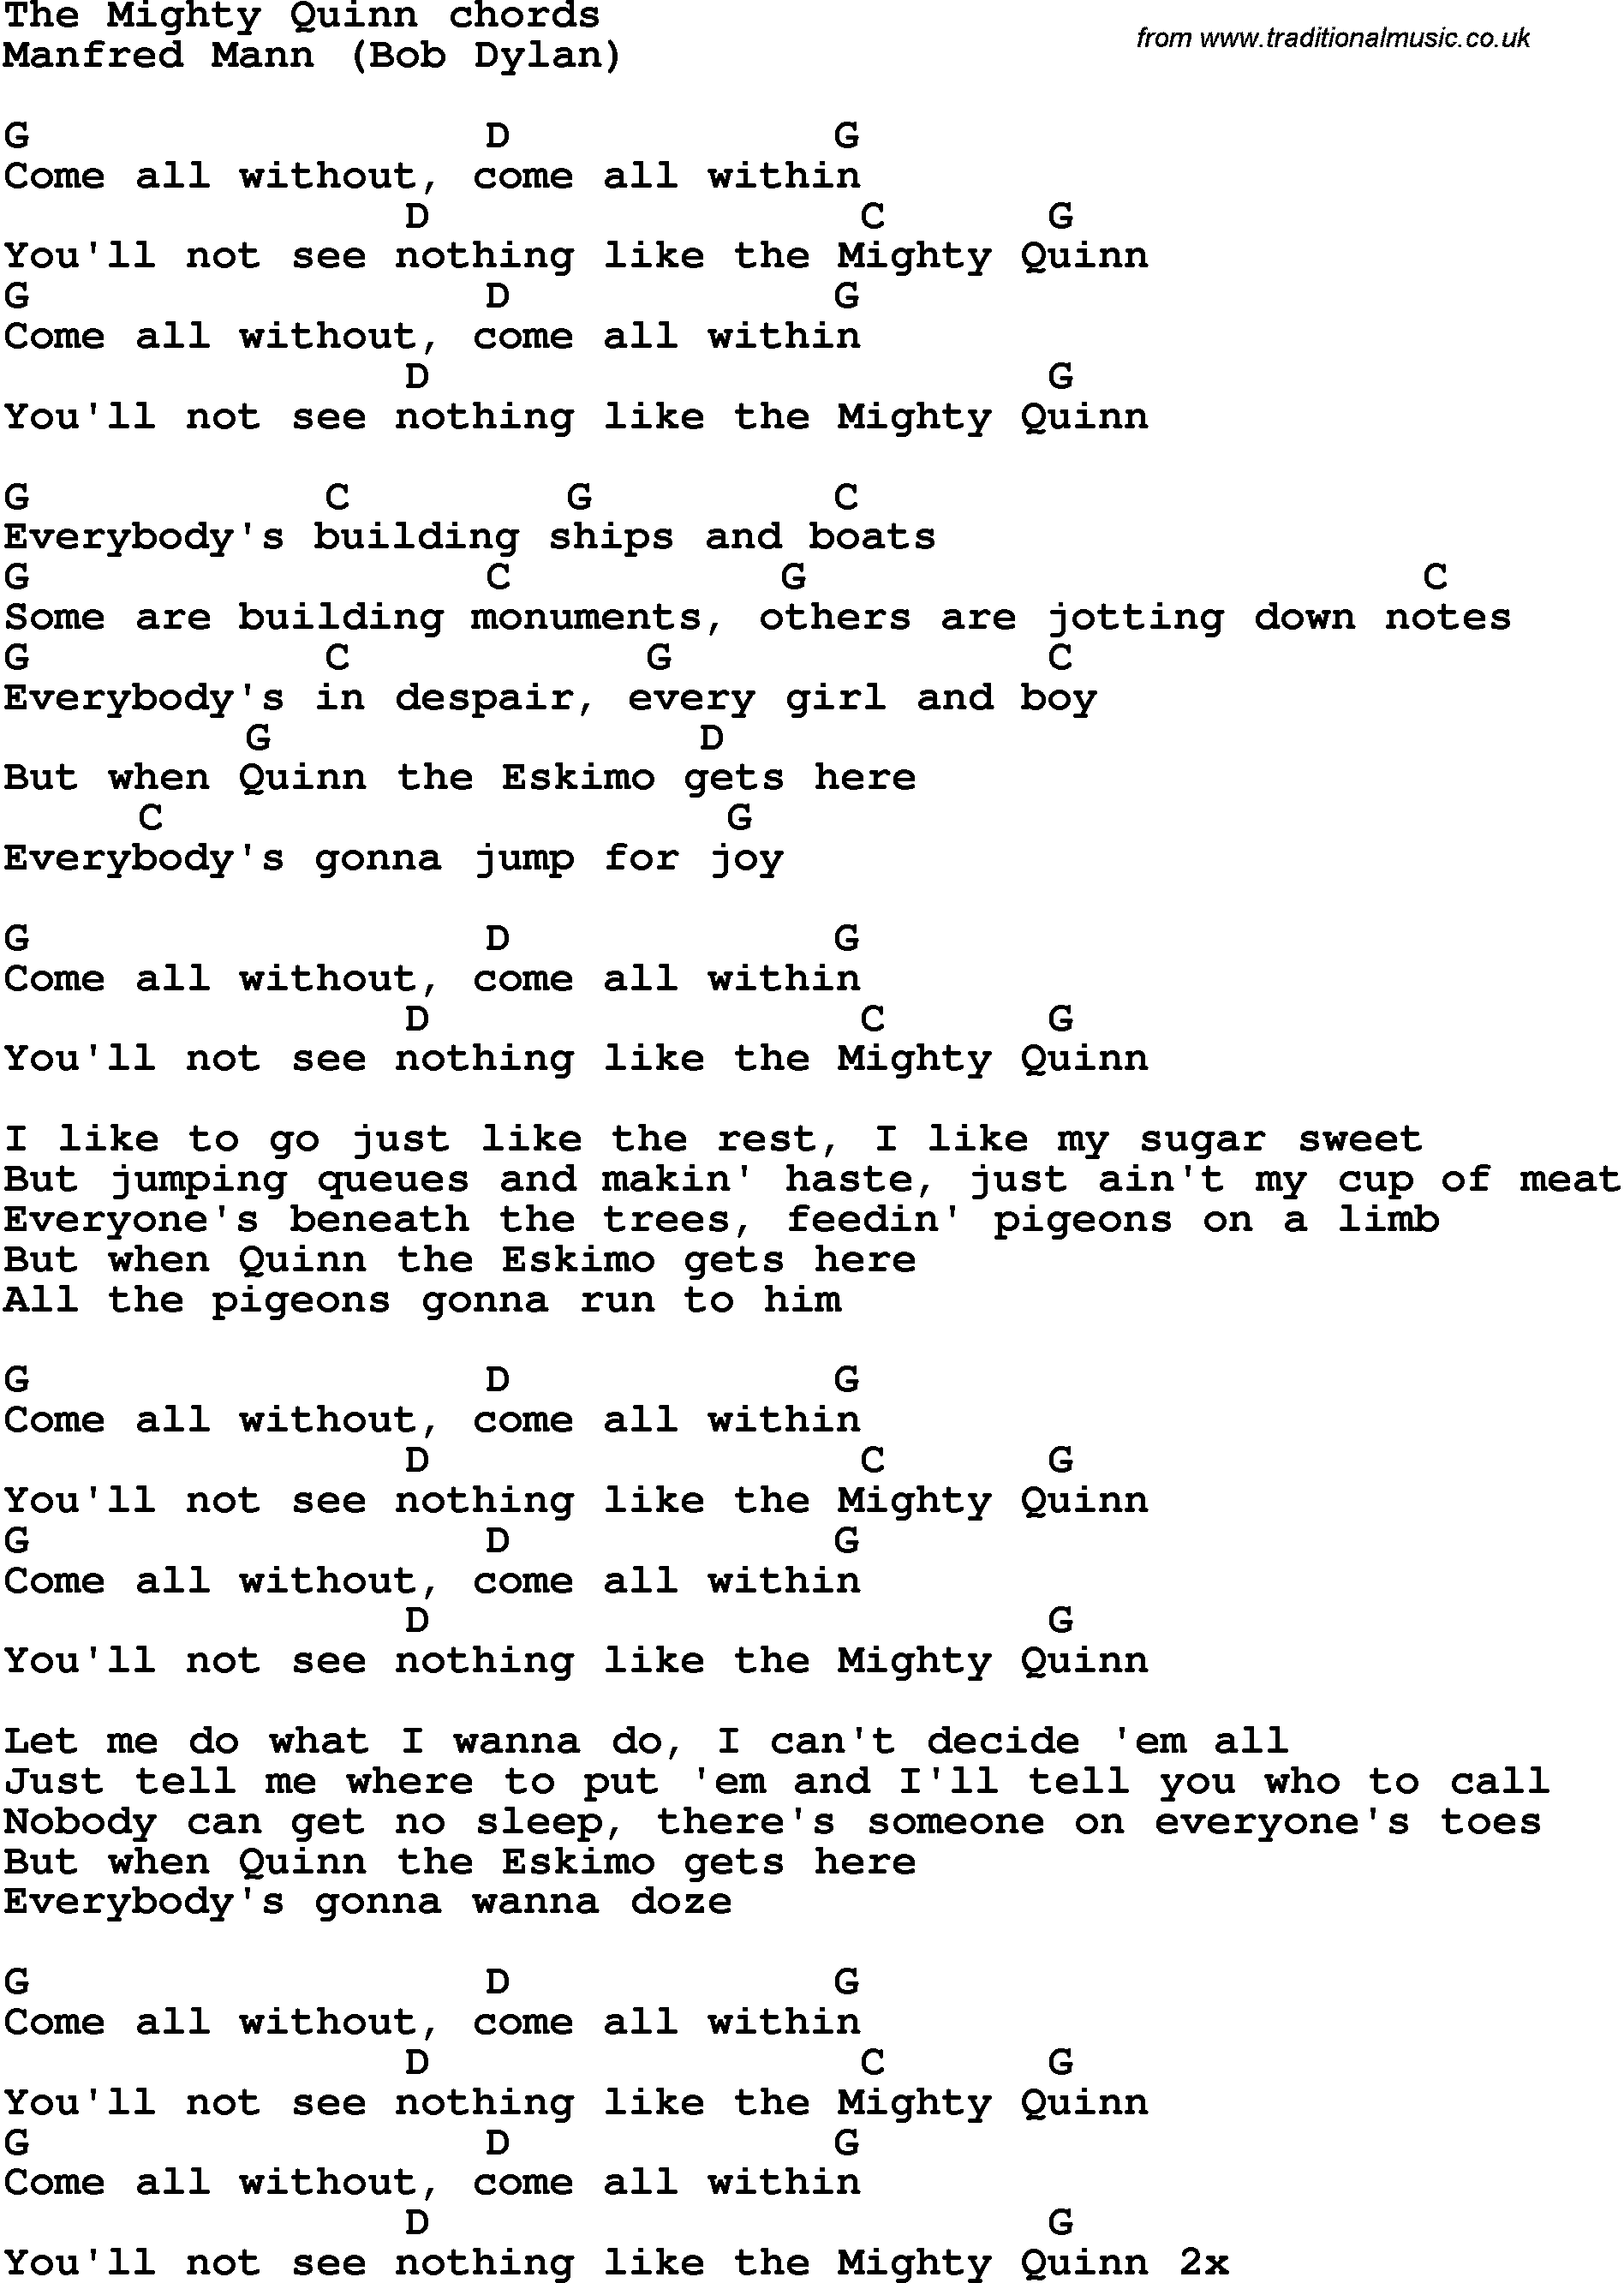 Song Lyrics with guitar chords for The Mighty Quinn - Manfred Mann